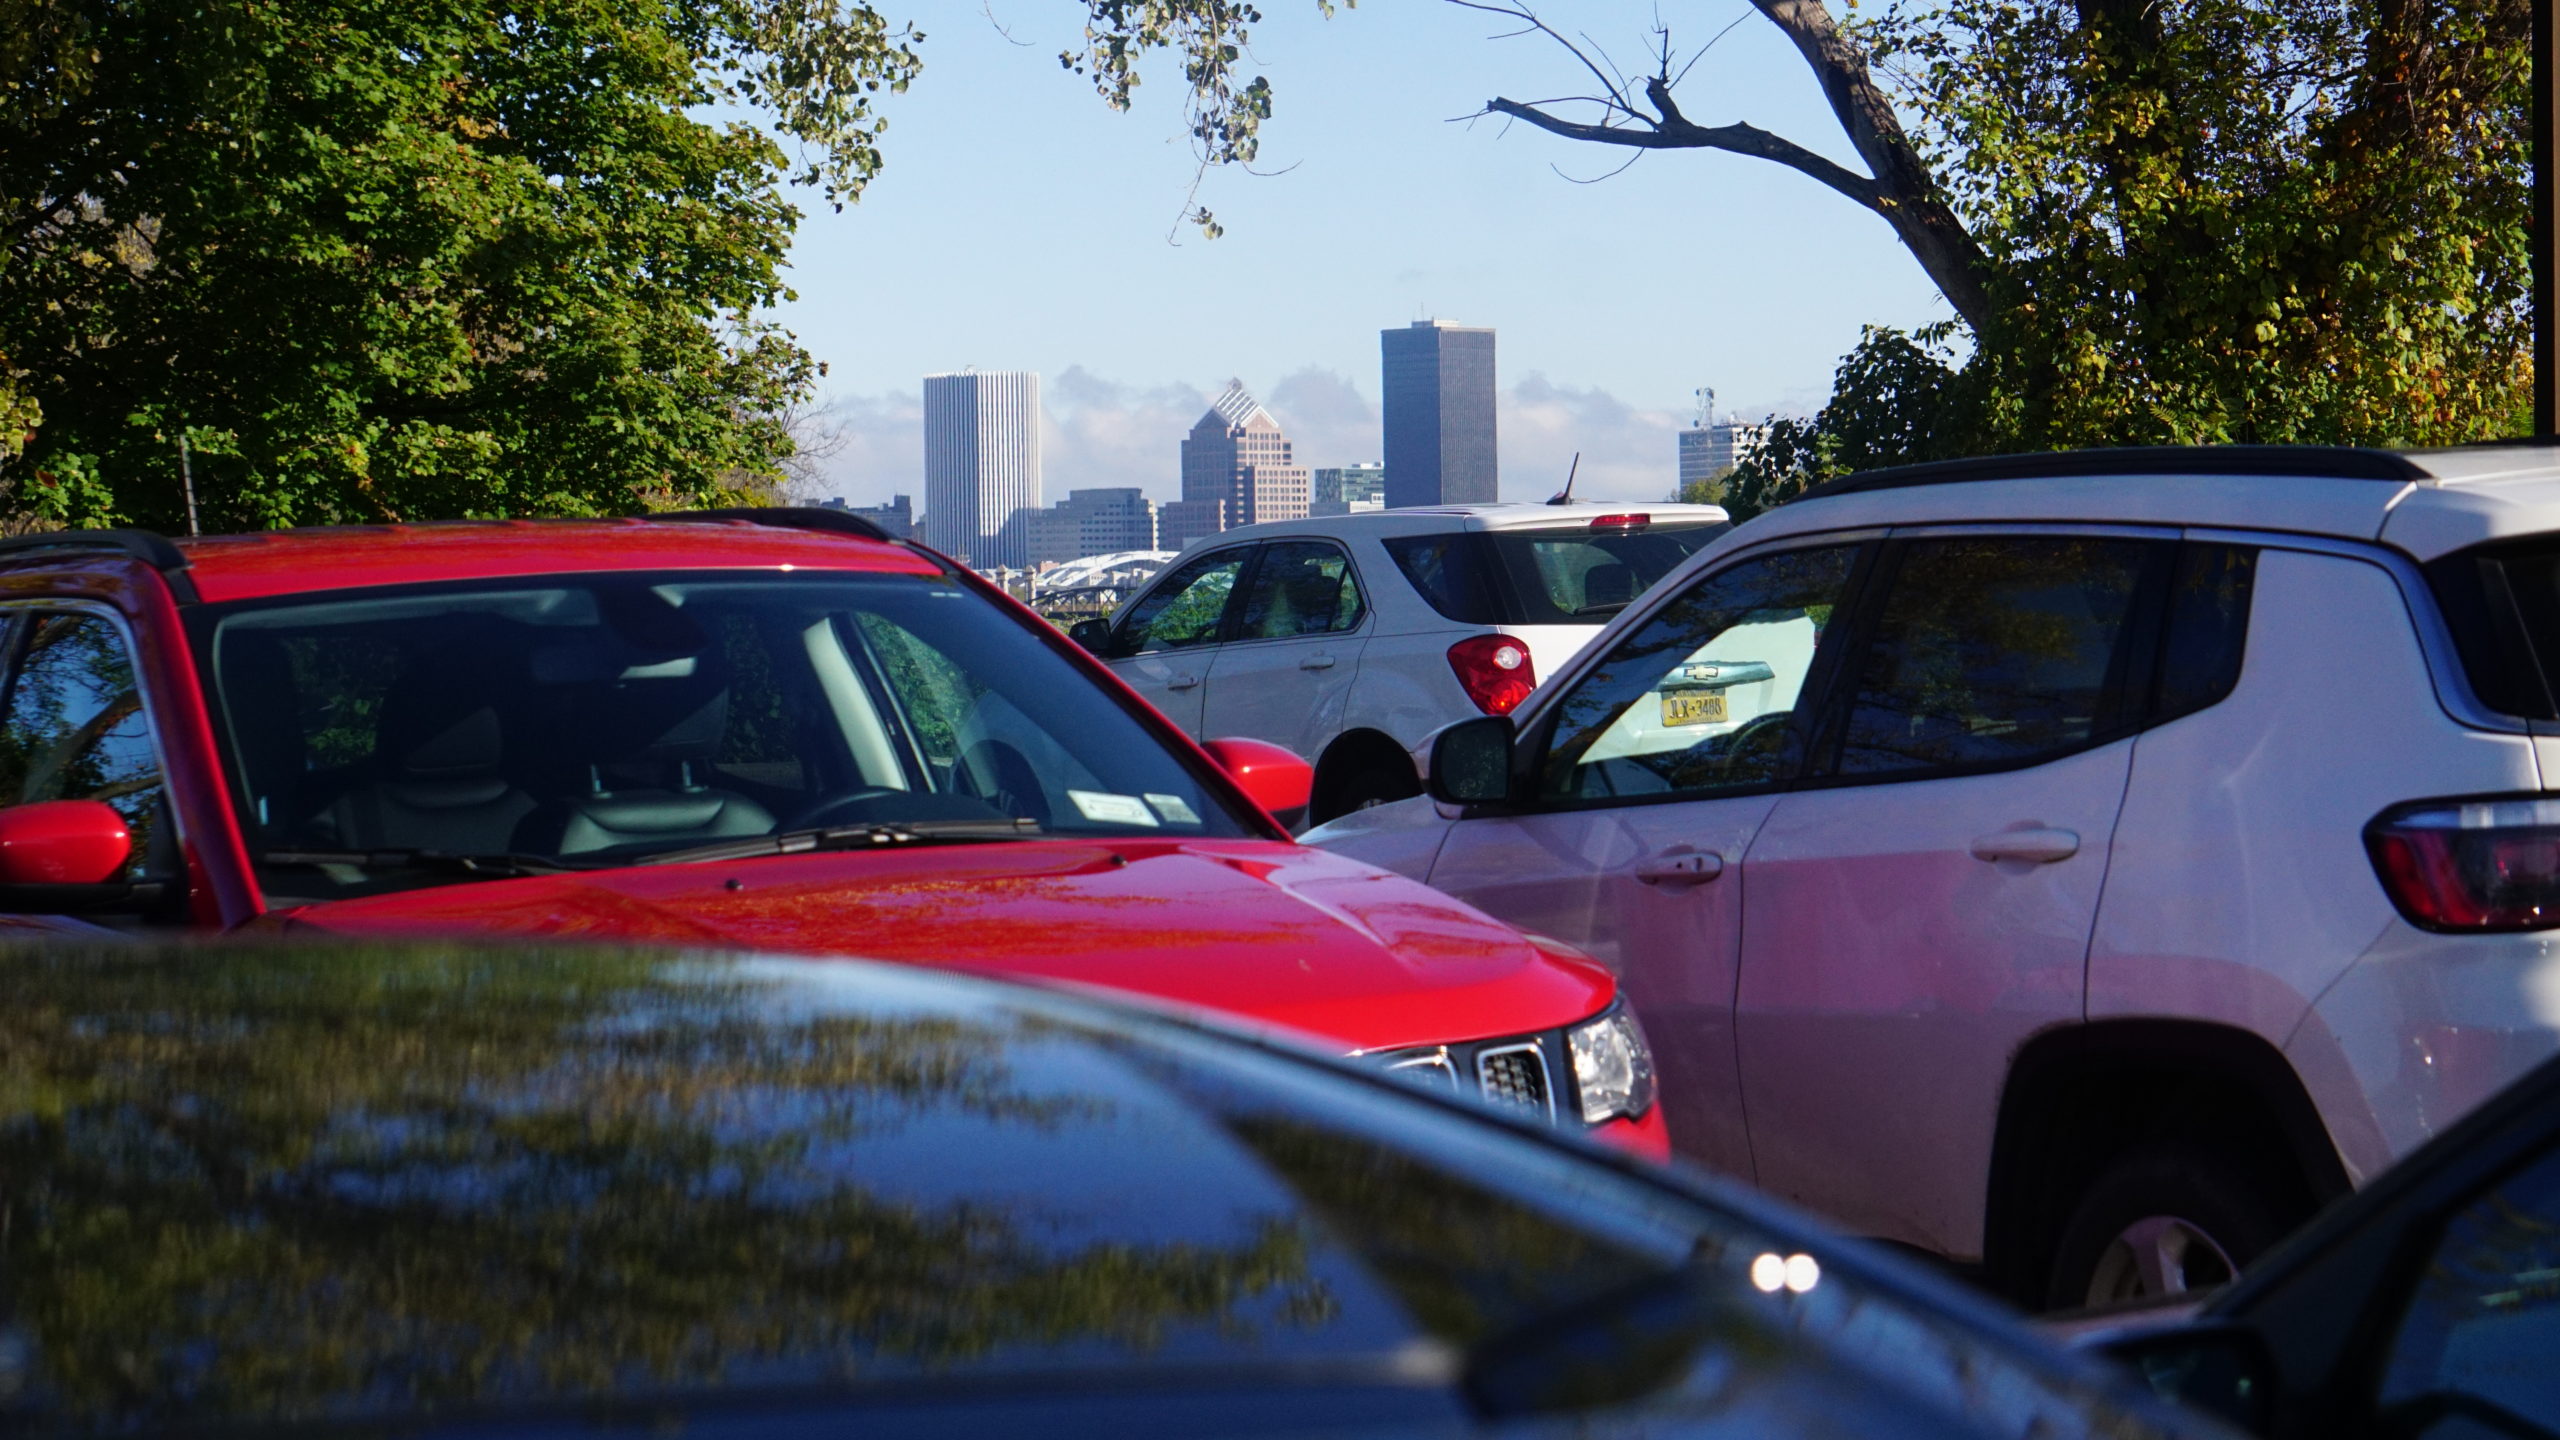 Red and white vehicles parked in lot with Rochester NY skyline in background